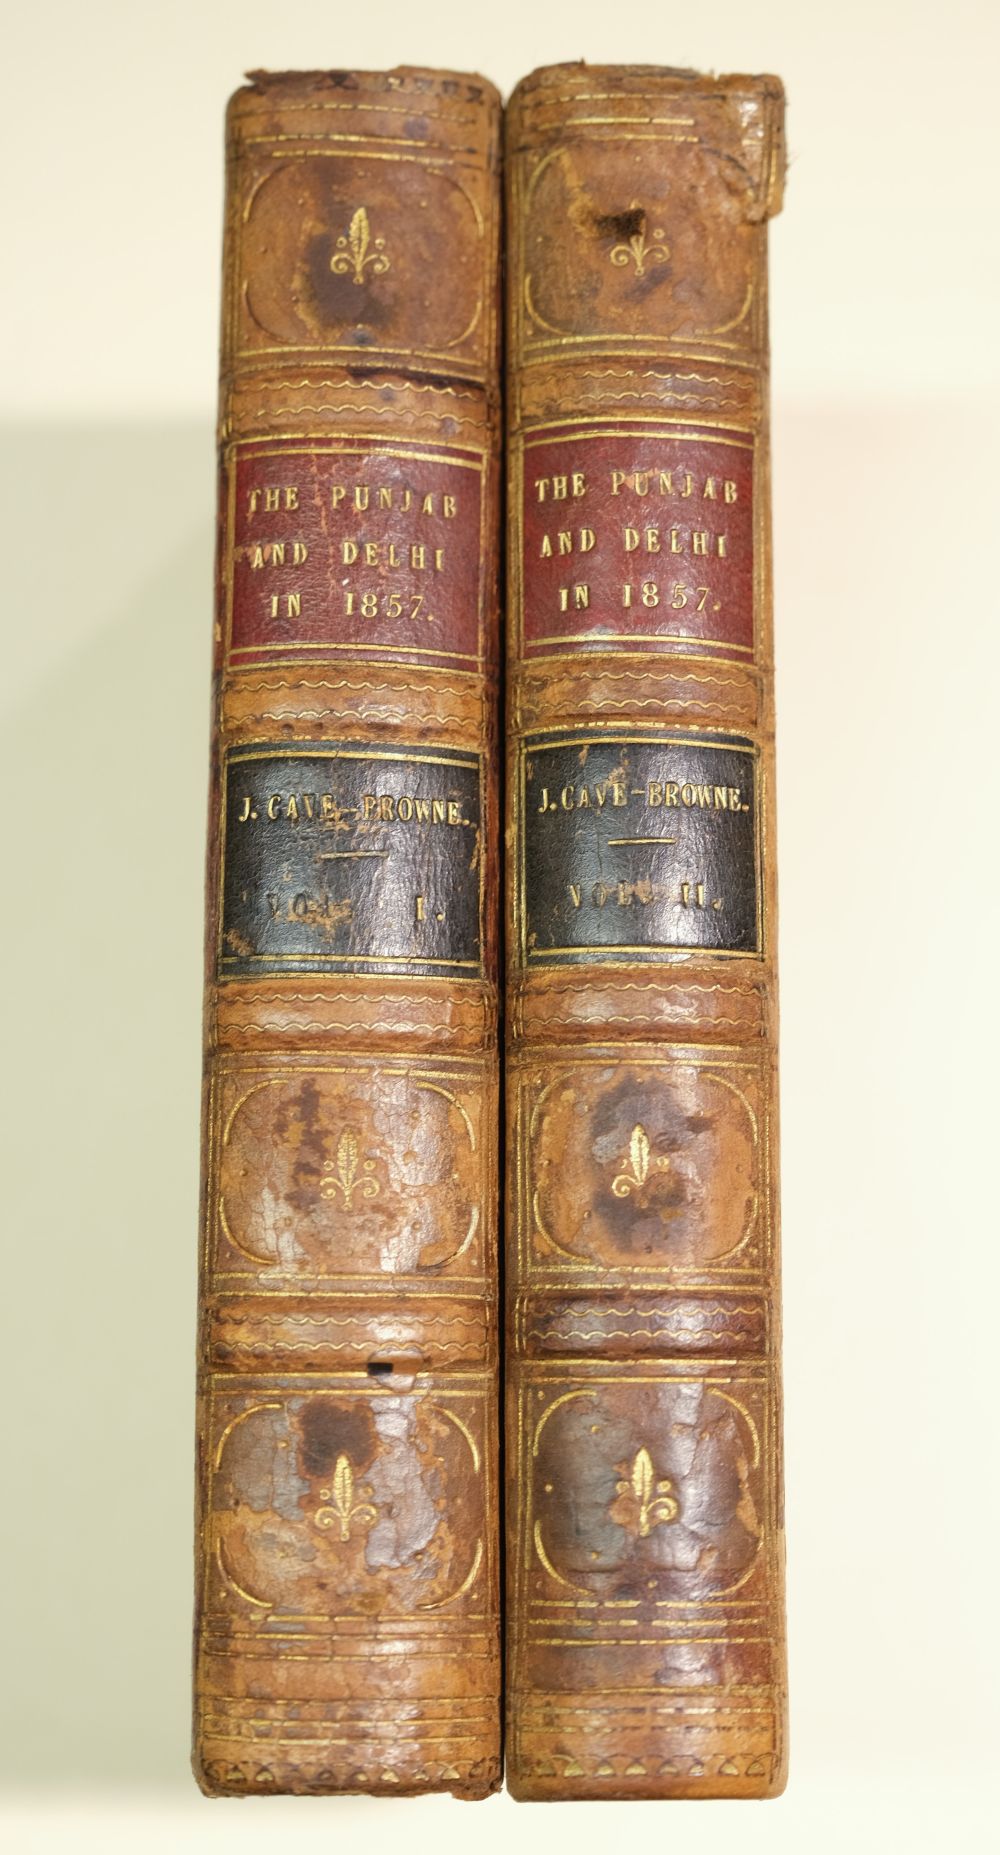 Cave-Browne (John). The Punjab and Delhi in 1857, 2 volumes, 1st edition, 1861 - Image 3 of 11